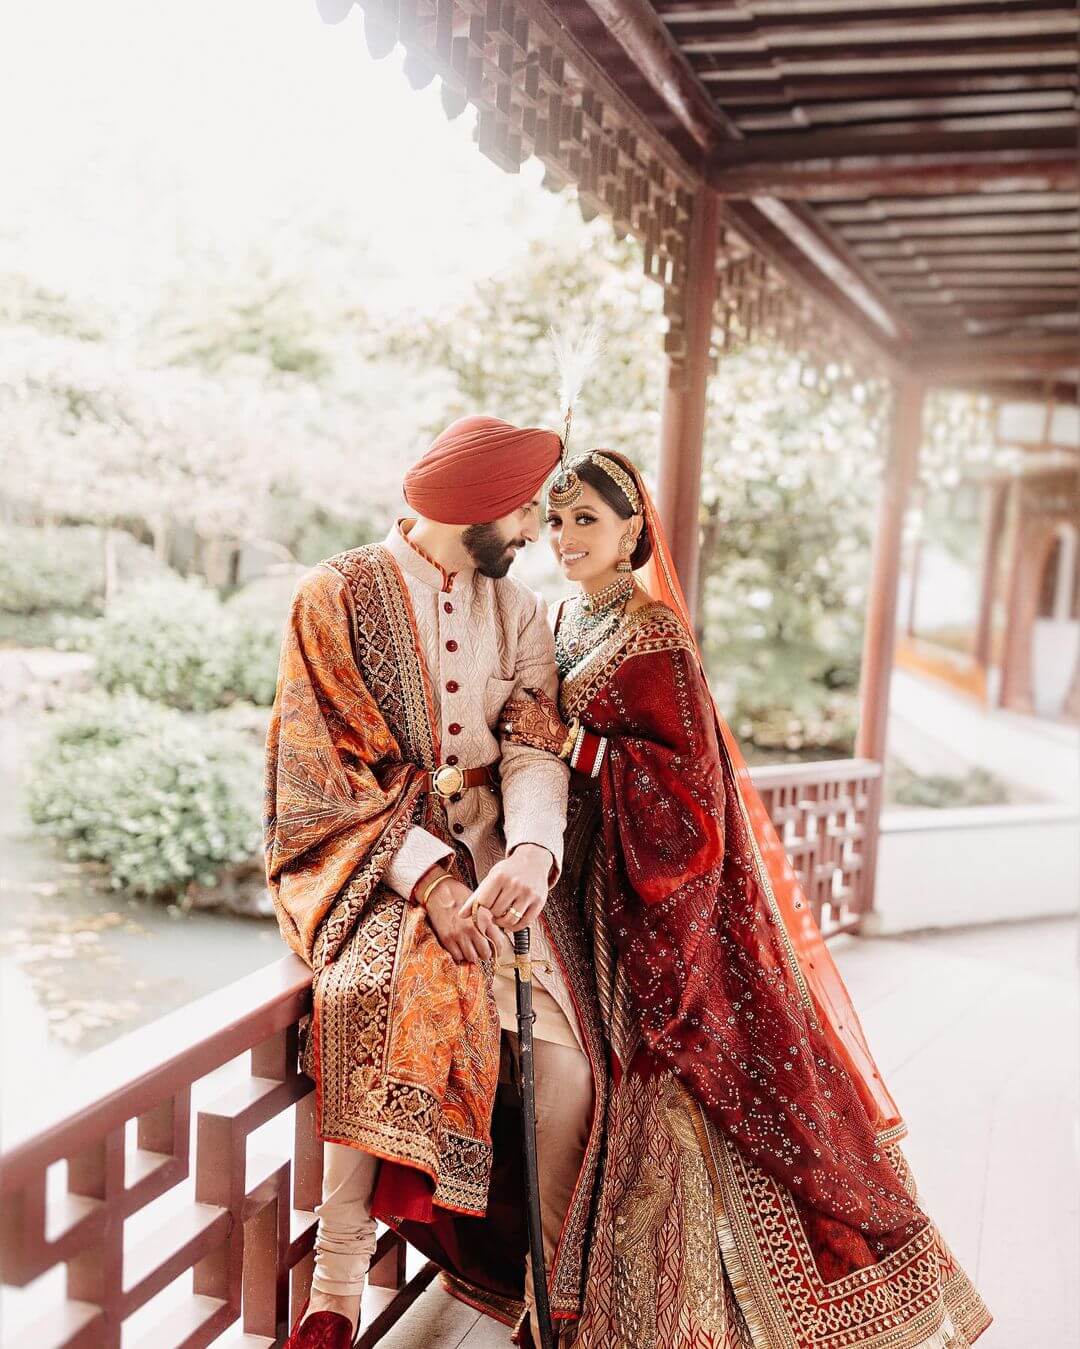 Evolution of Indian Wedding Couples Poses From Tradition to Trend   MyWeddingMyDay